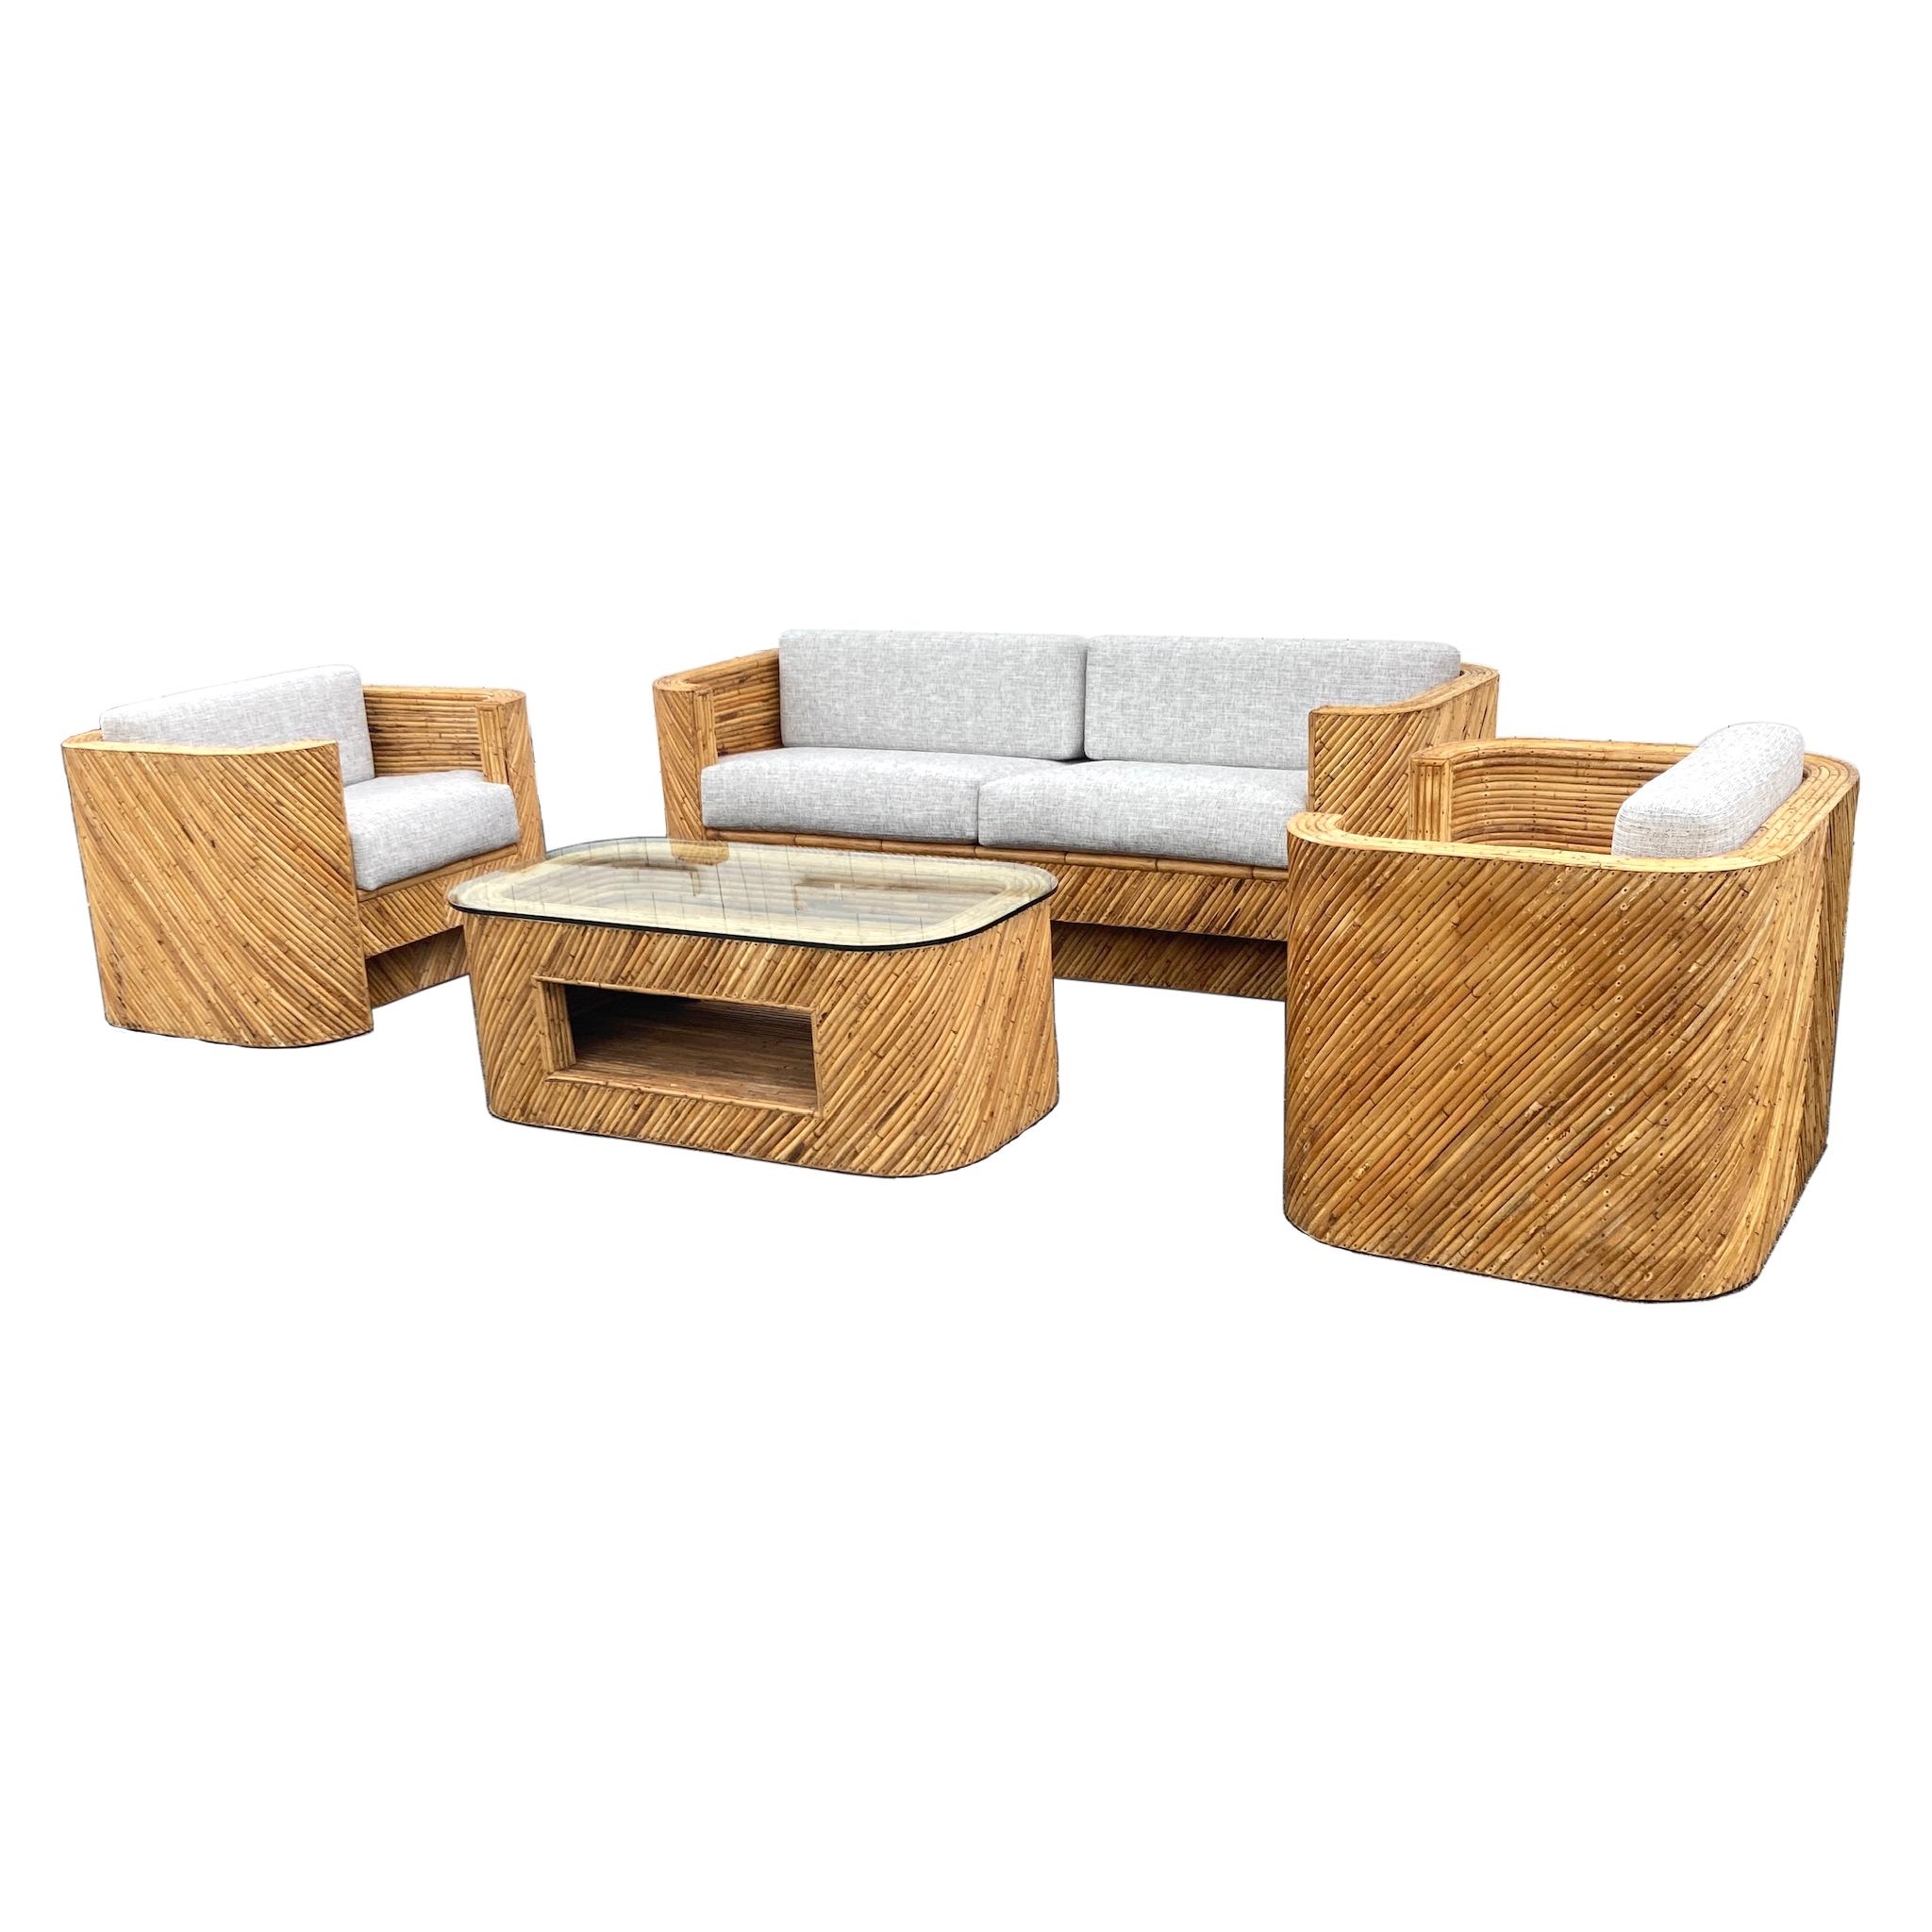 This set of bamboo furniture epitomizes the Machine Age with its low-slung streamlined look. No frills or embellishments interfere with its pared-down simplicity. The effect is heightened by the rusticity of the darkened original nailheads and the